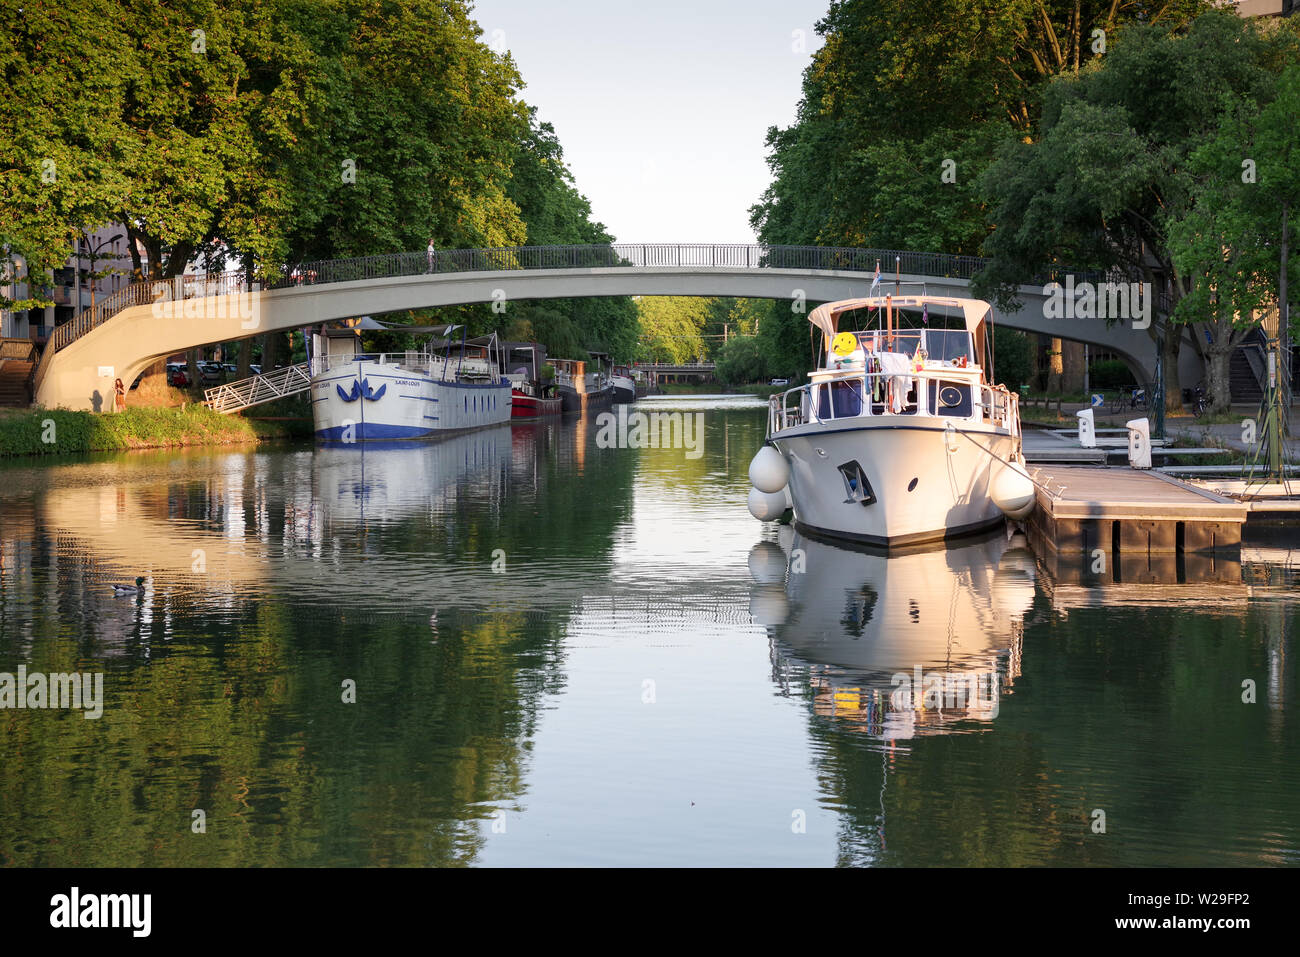 Boats moored along the picturesque Canal du Midi inToulouse, France Stock Photo